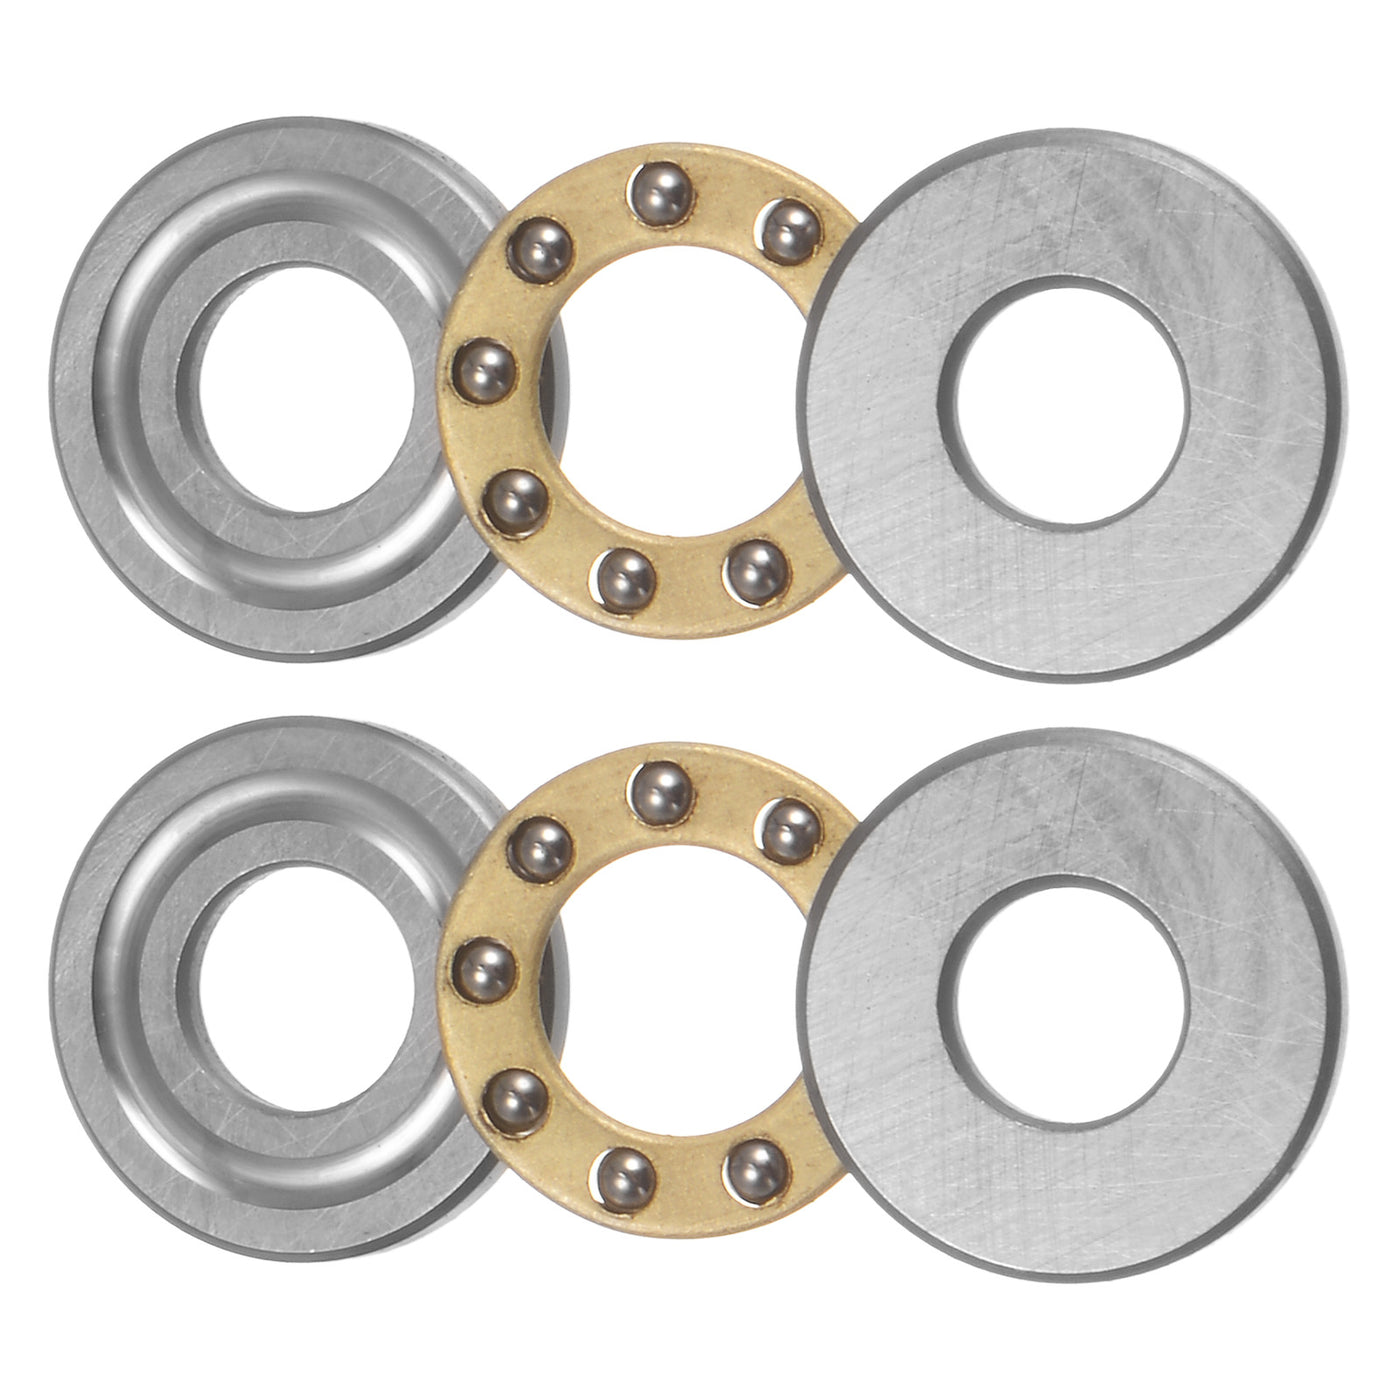 uxcell Uxcell F5-12M Thrust Ball Bearing 5x12x4mm Brass with Washers ABEC3 2pcs